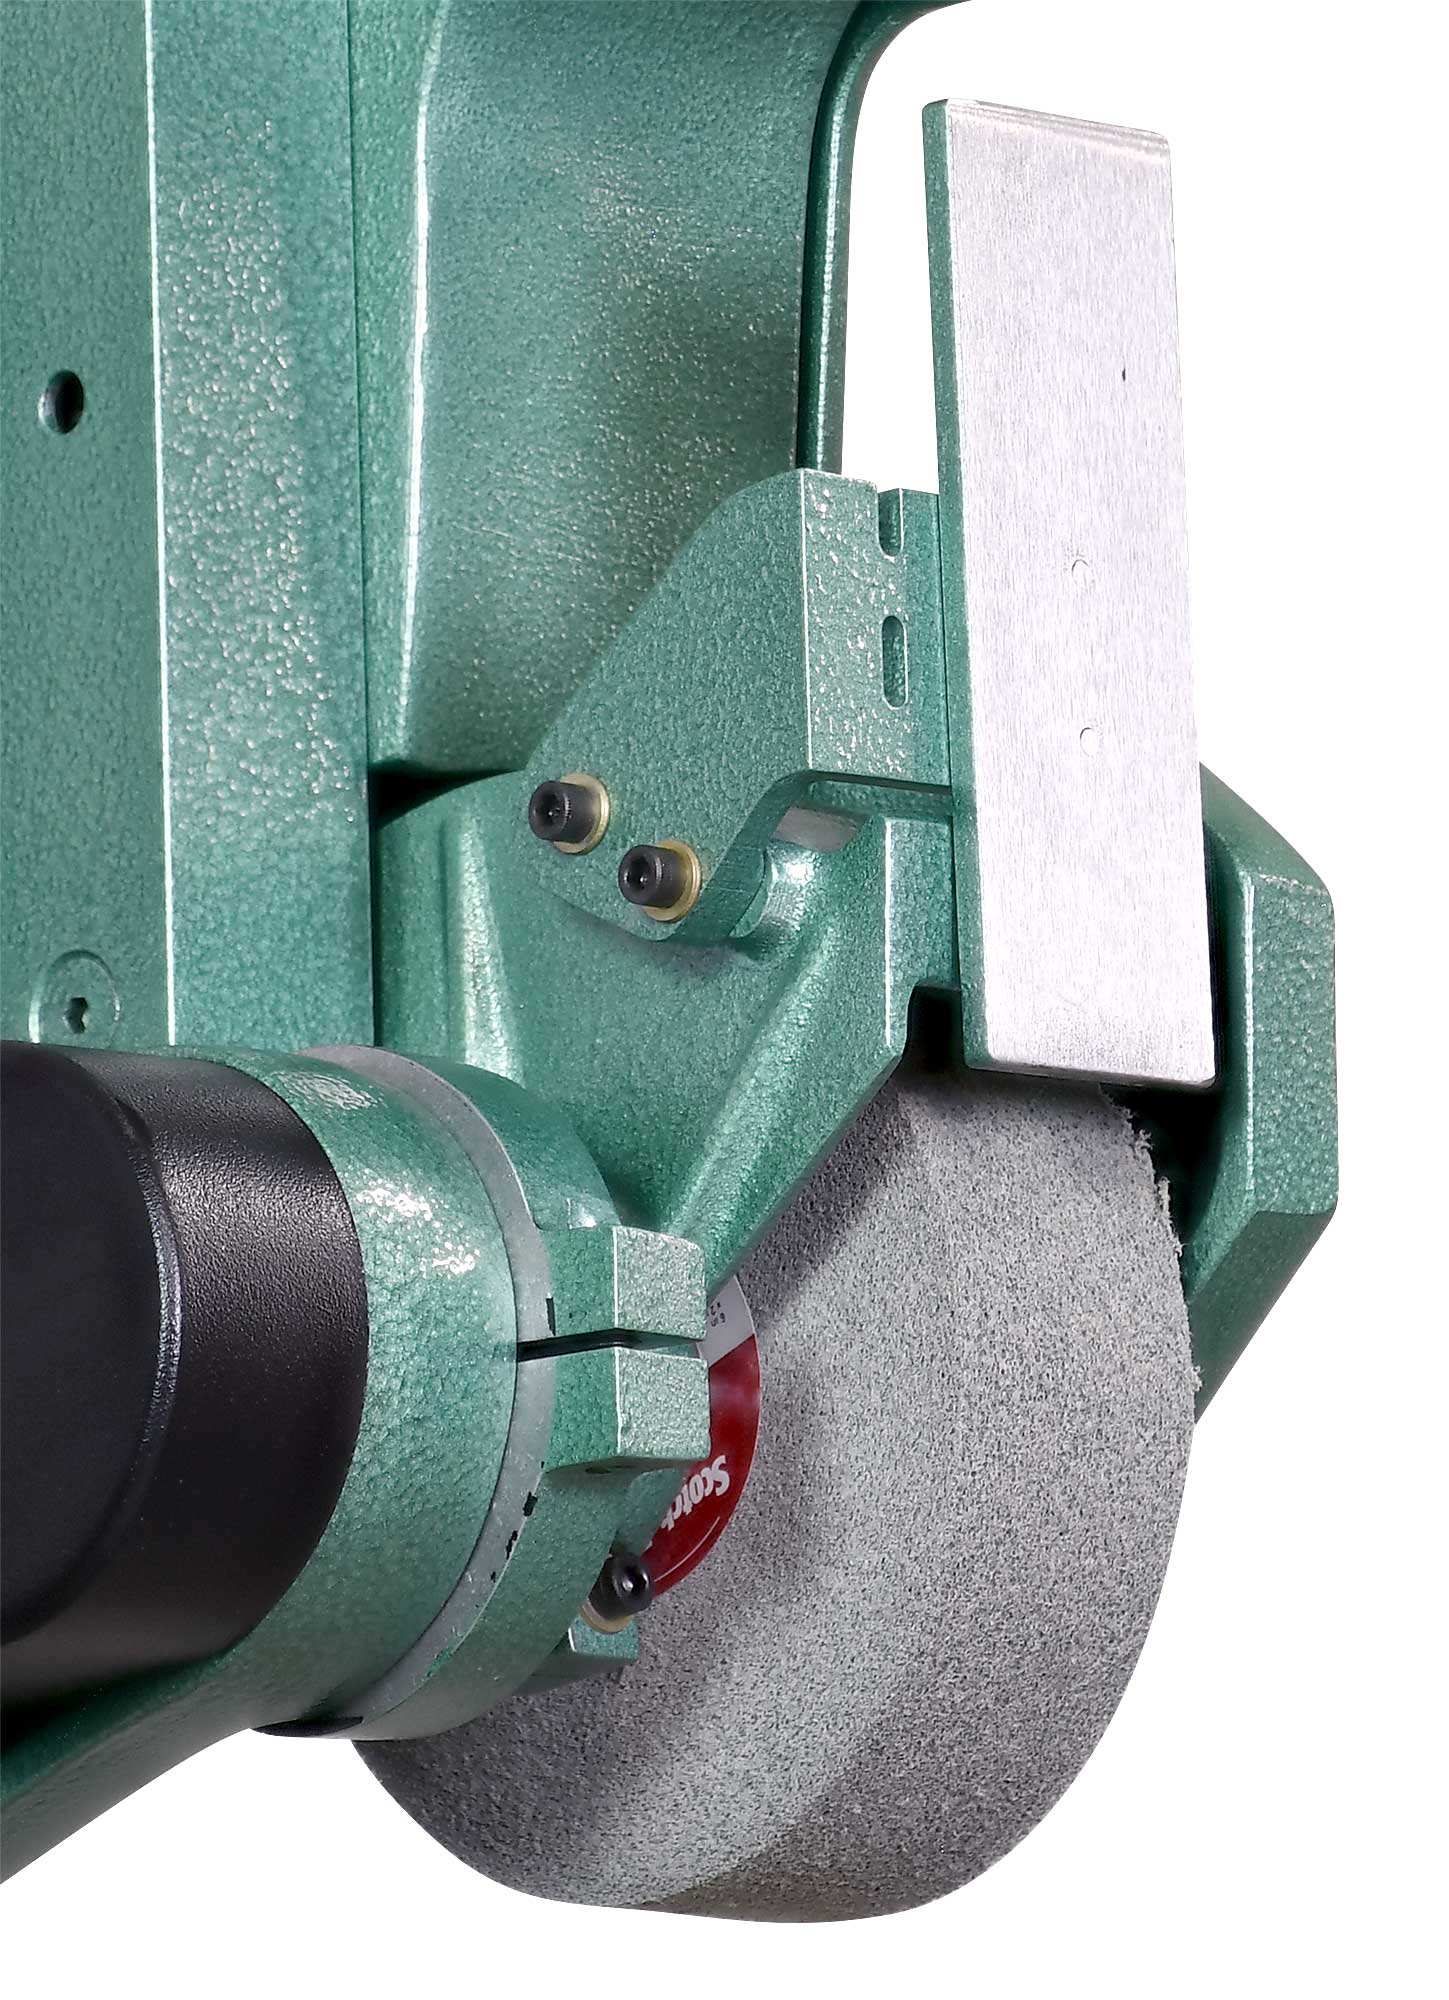 24820 - X400 fixed speed belt grinder.  Did you know you can remove the contact wheel and use a wheel adapter to run wheels like Scotchbrite® or even a buffing wheel.